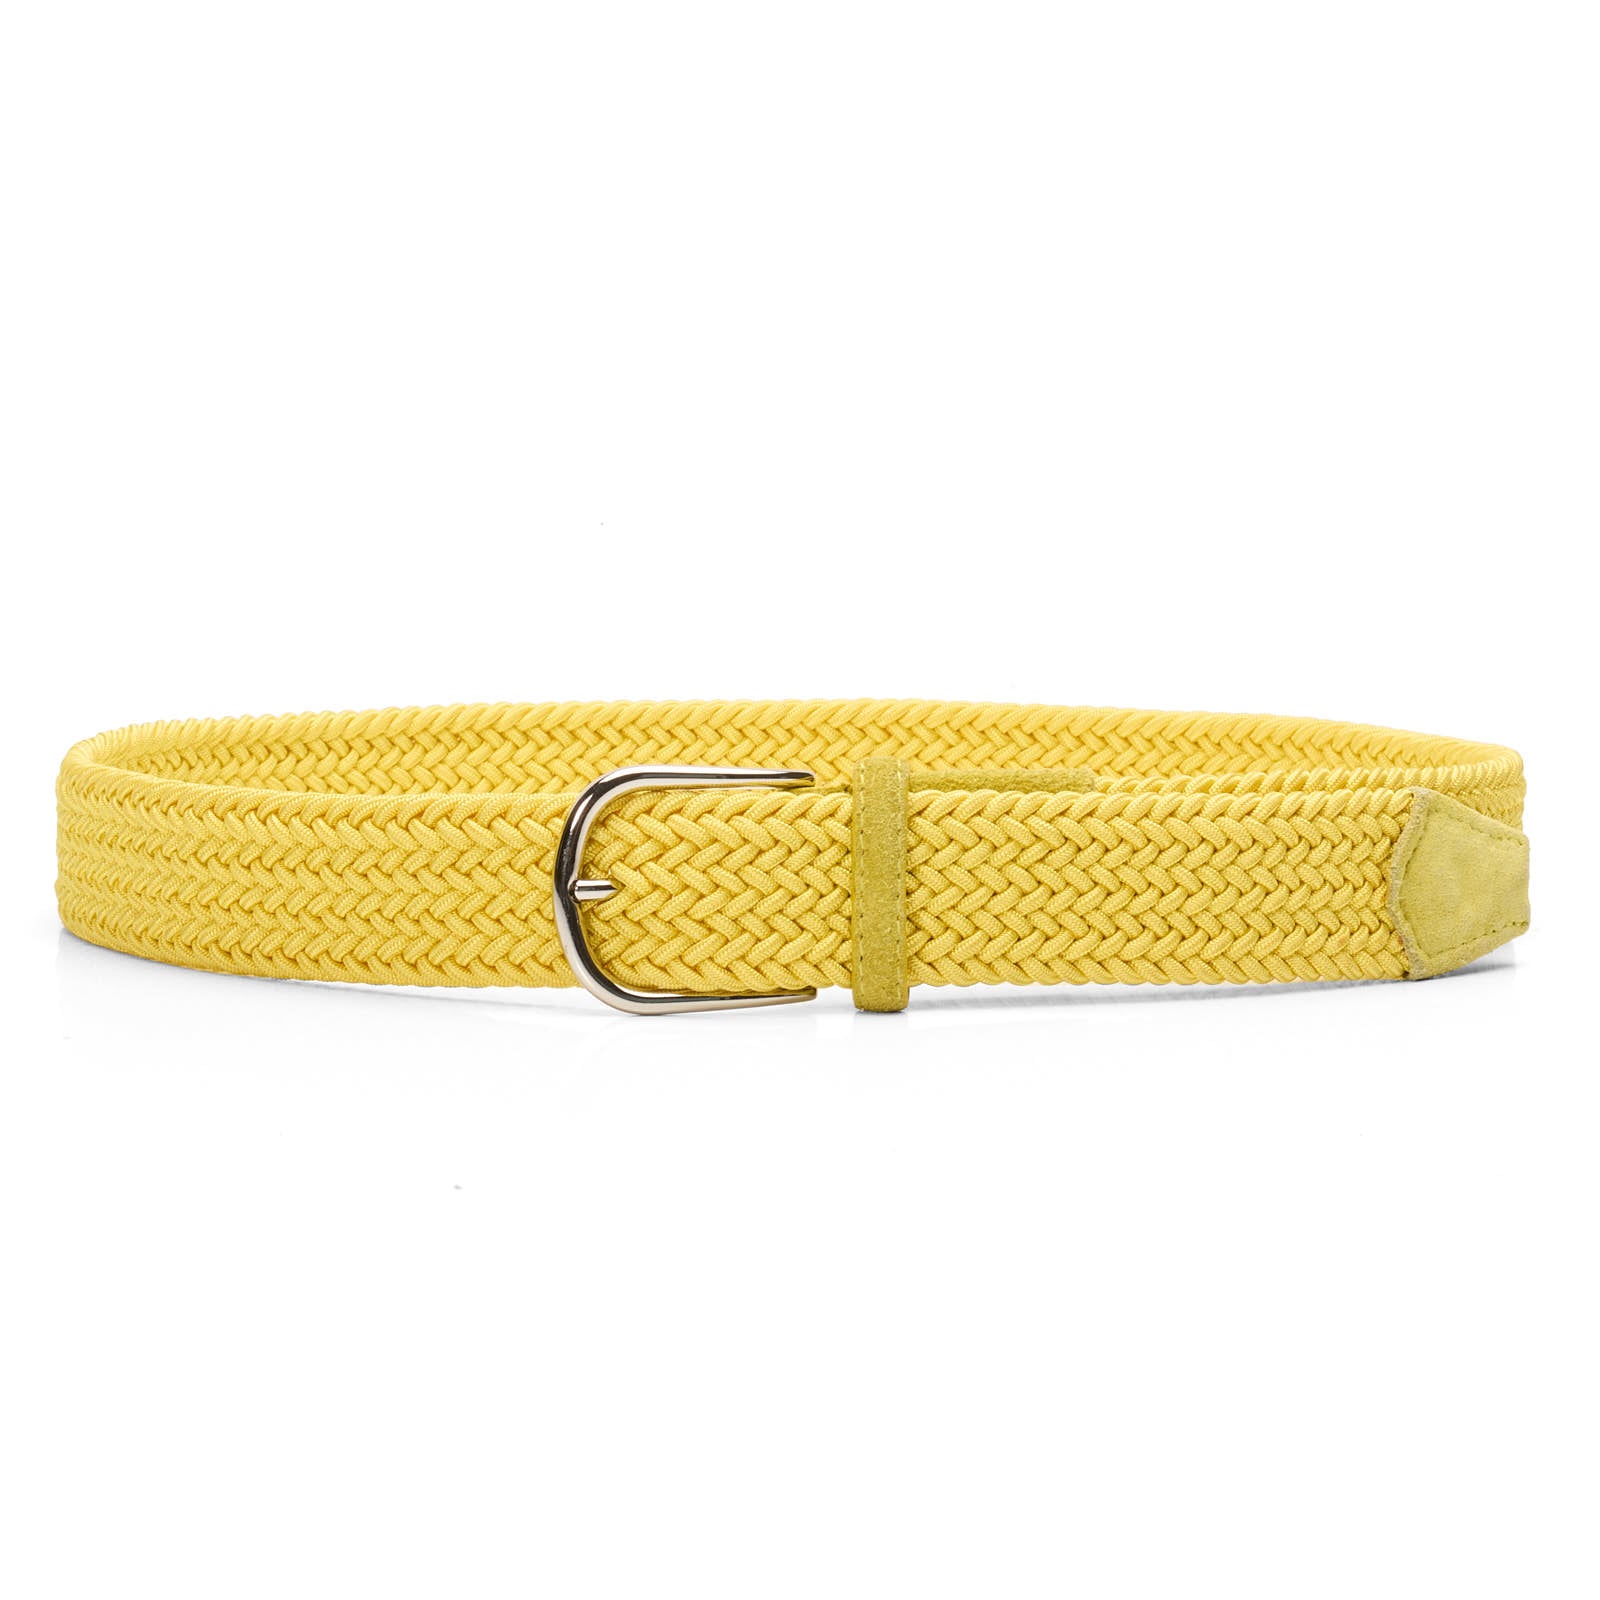 PAOLO VITALE for VANNUCCI Milano Yellow Stretch Woven Braided Belt 100cm NEW 46"